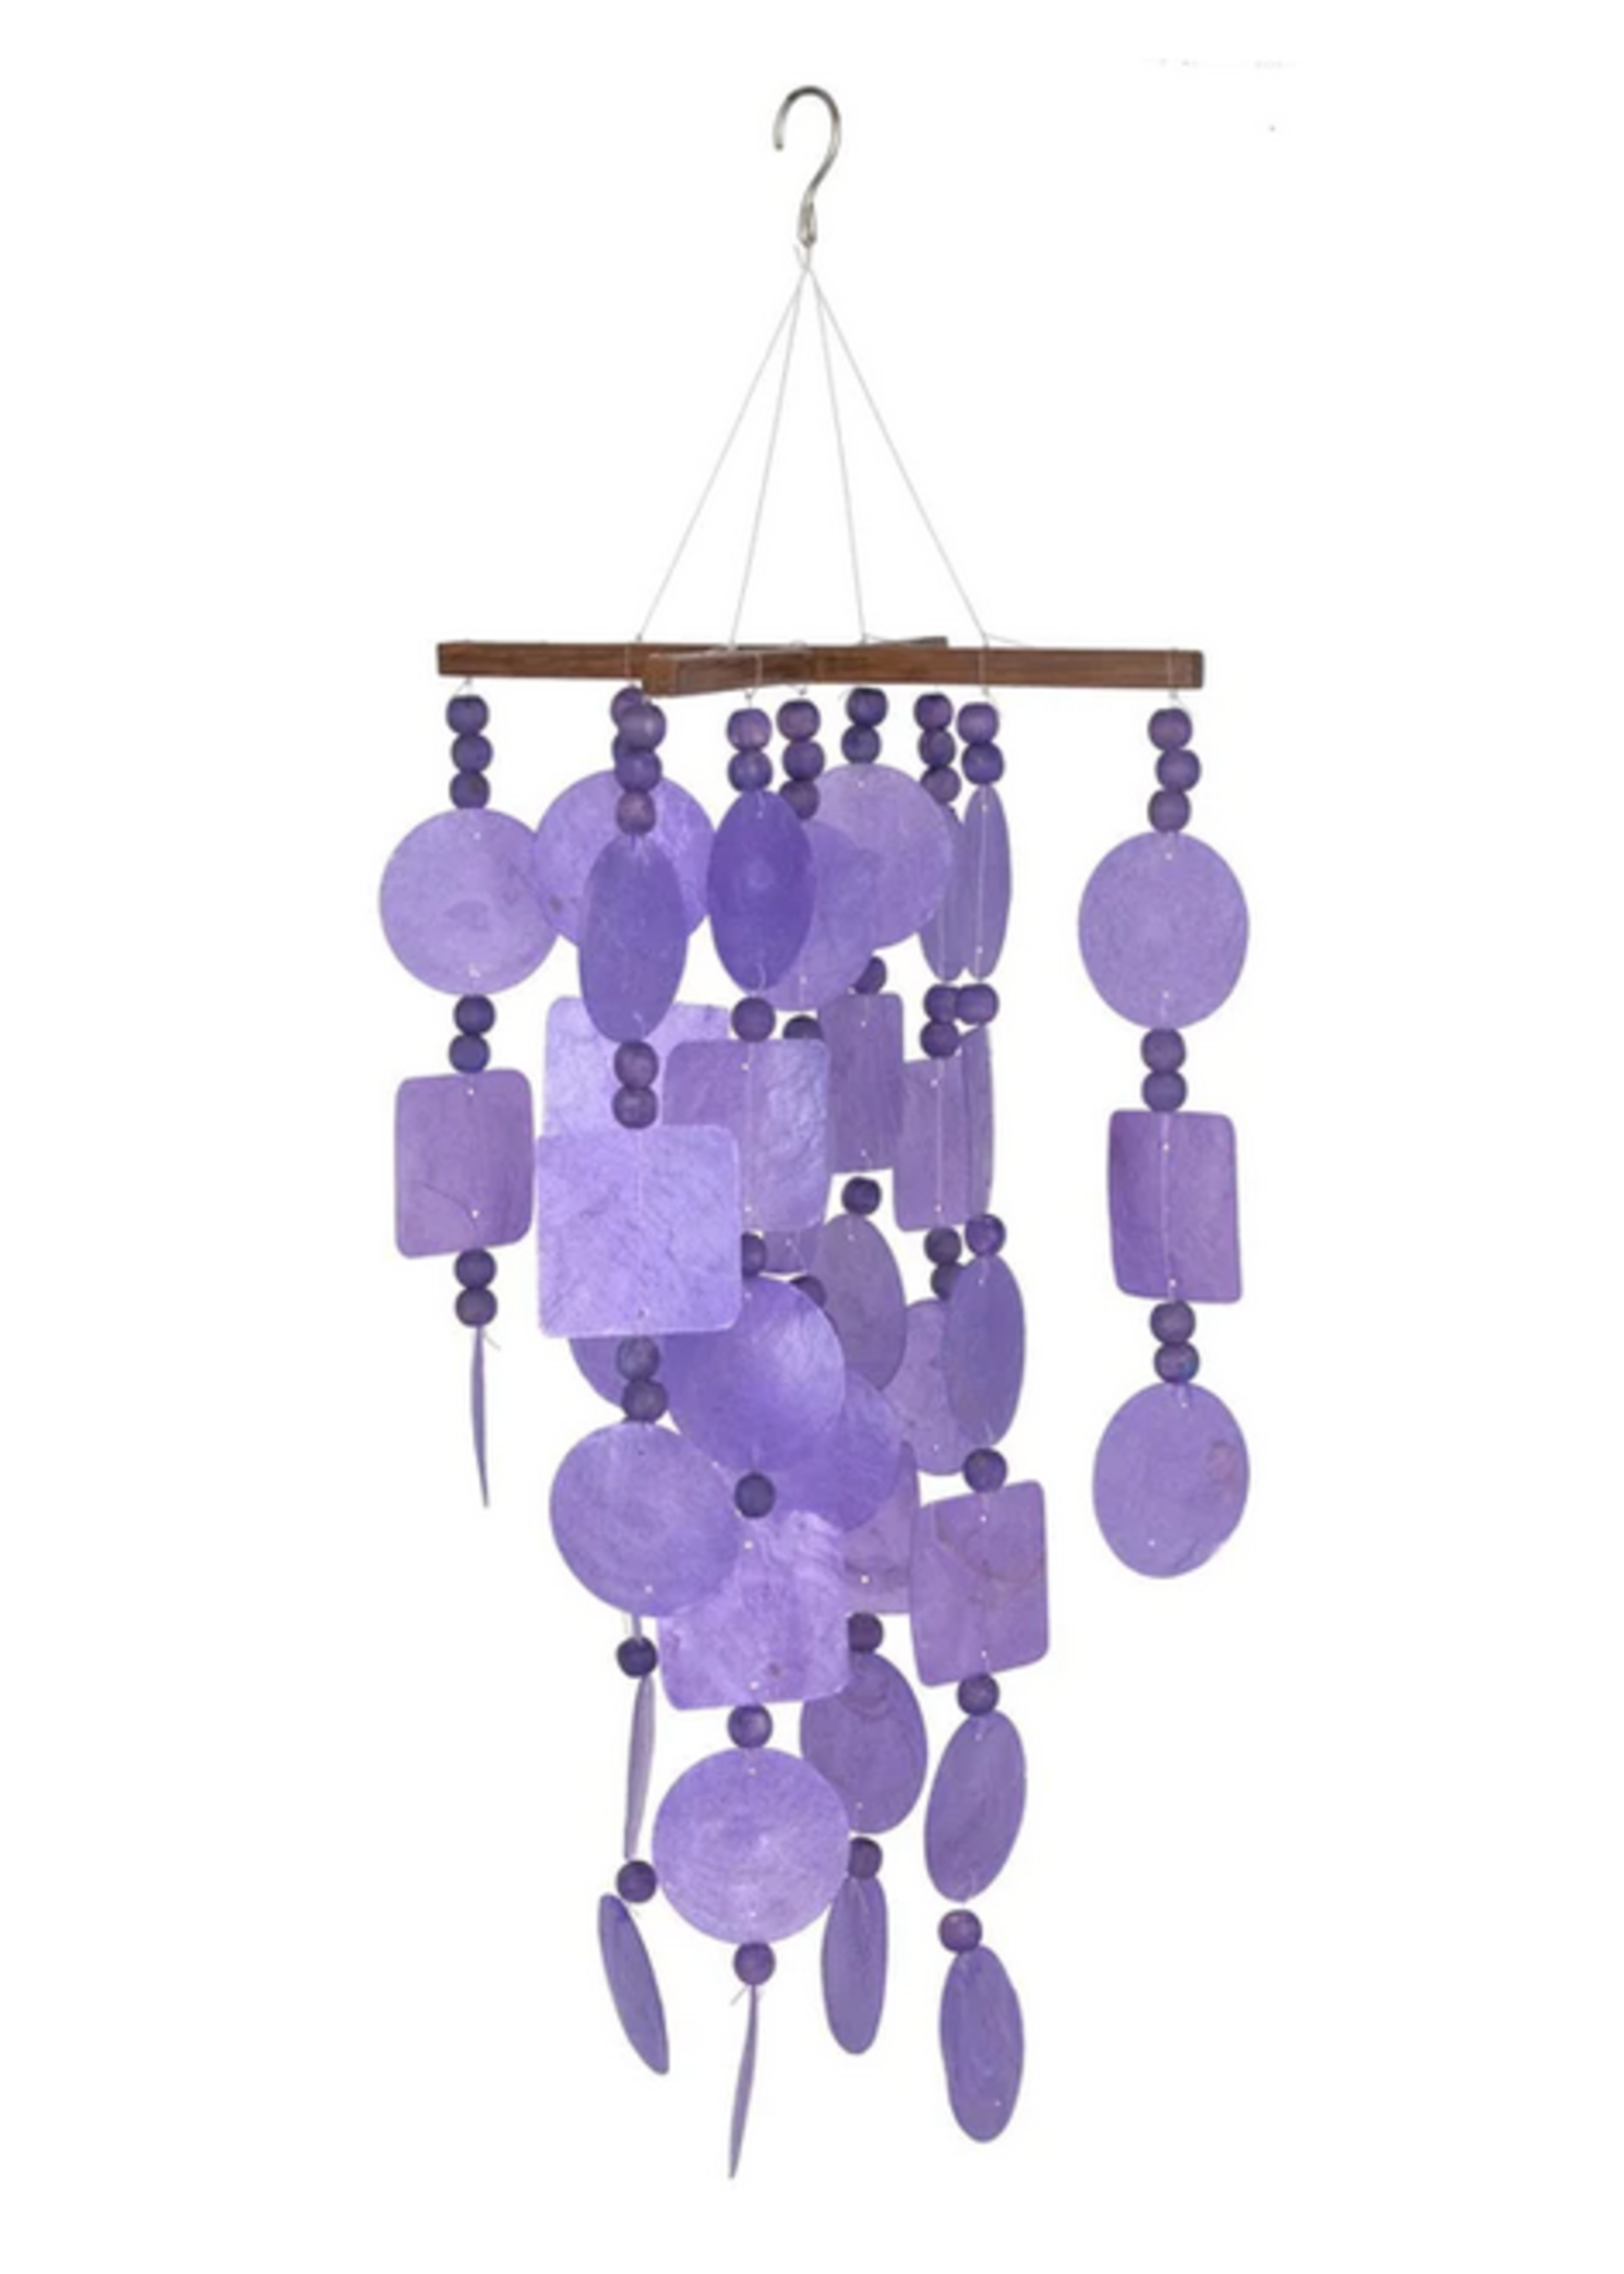 Woodstock CAPIZ Purple Chime With Wooden Beads